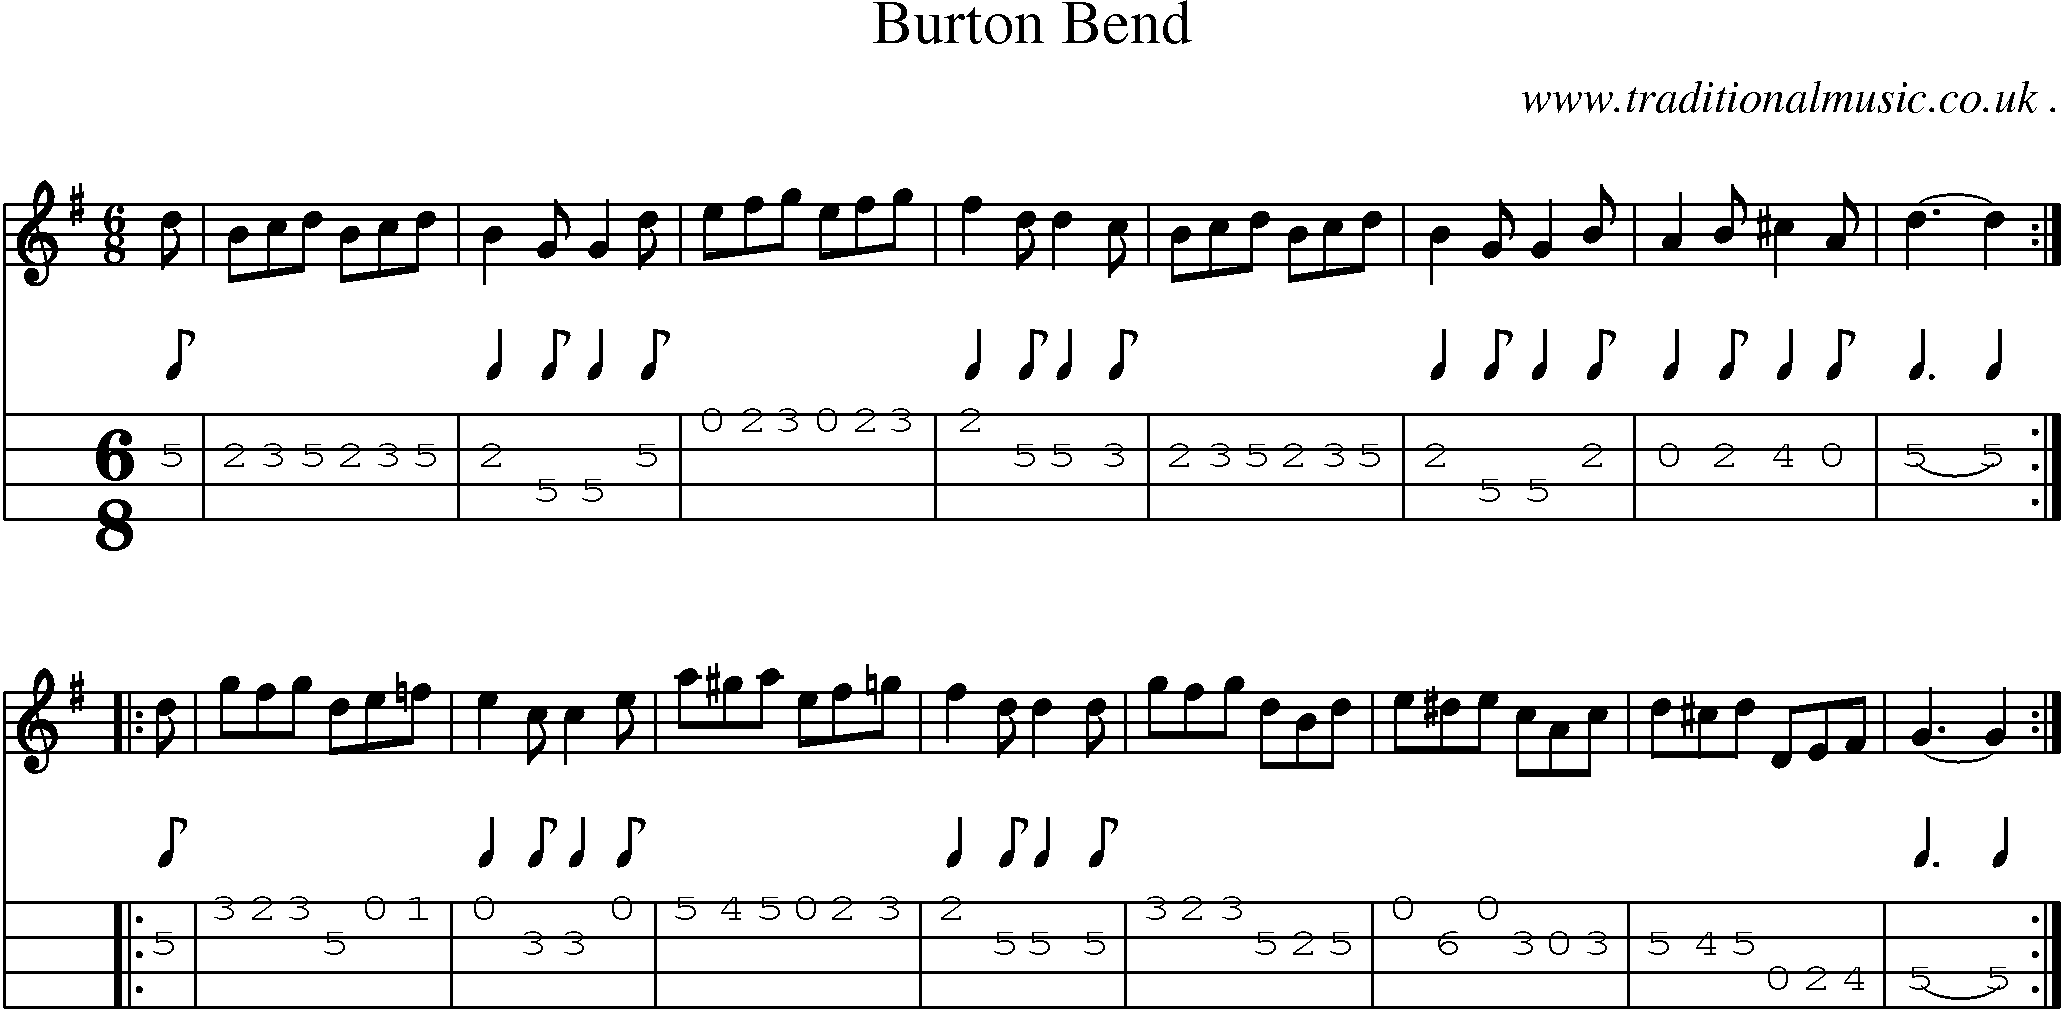 Sheet-music  score, Chords and Mandolin Tabs for Burton Bend